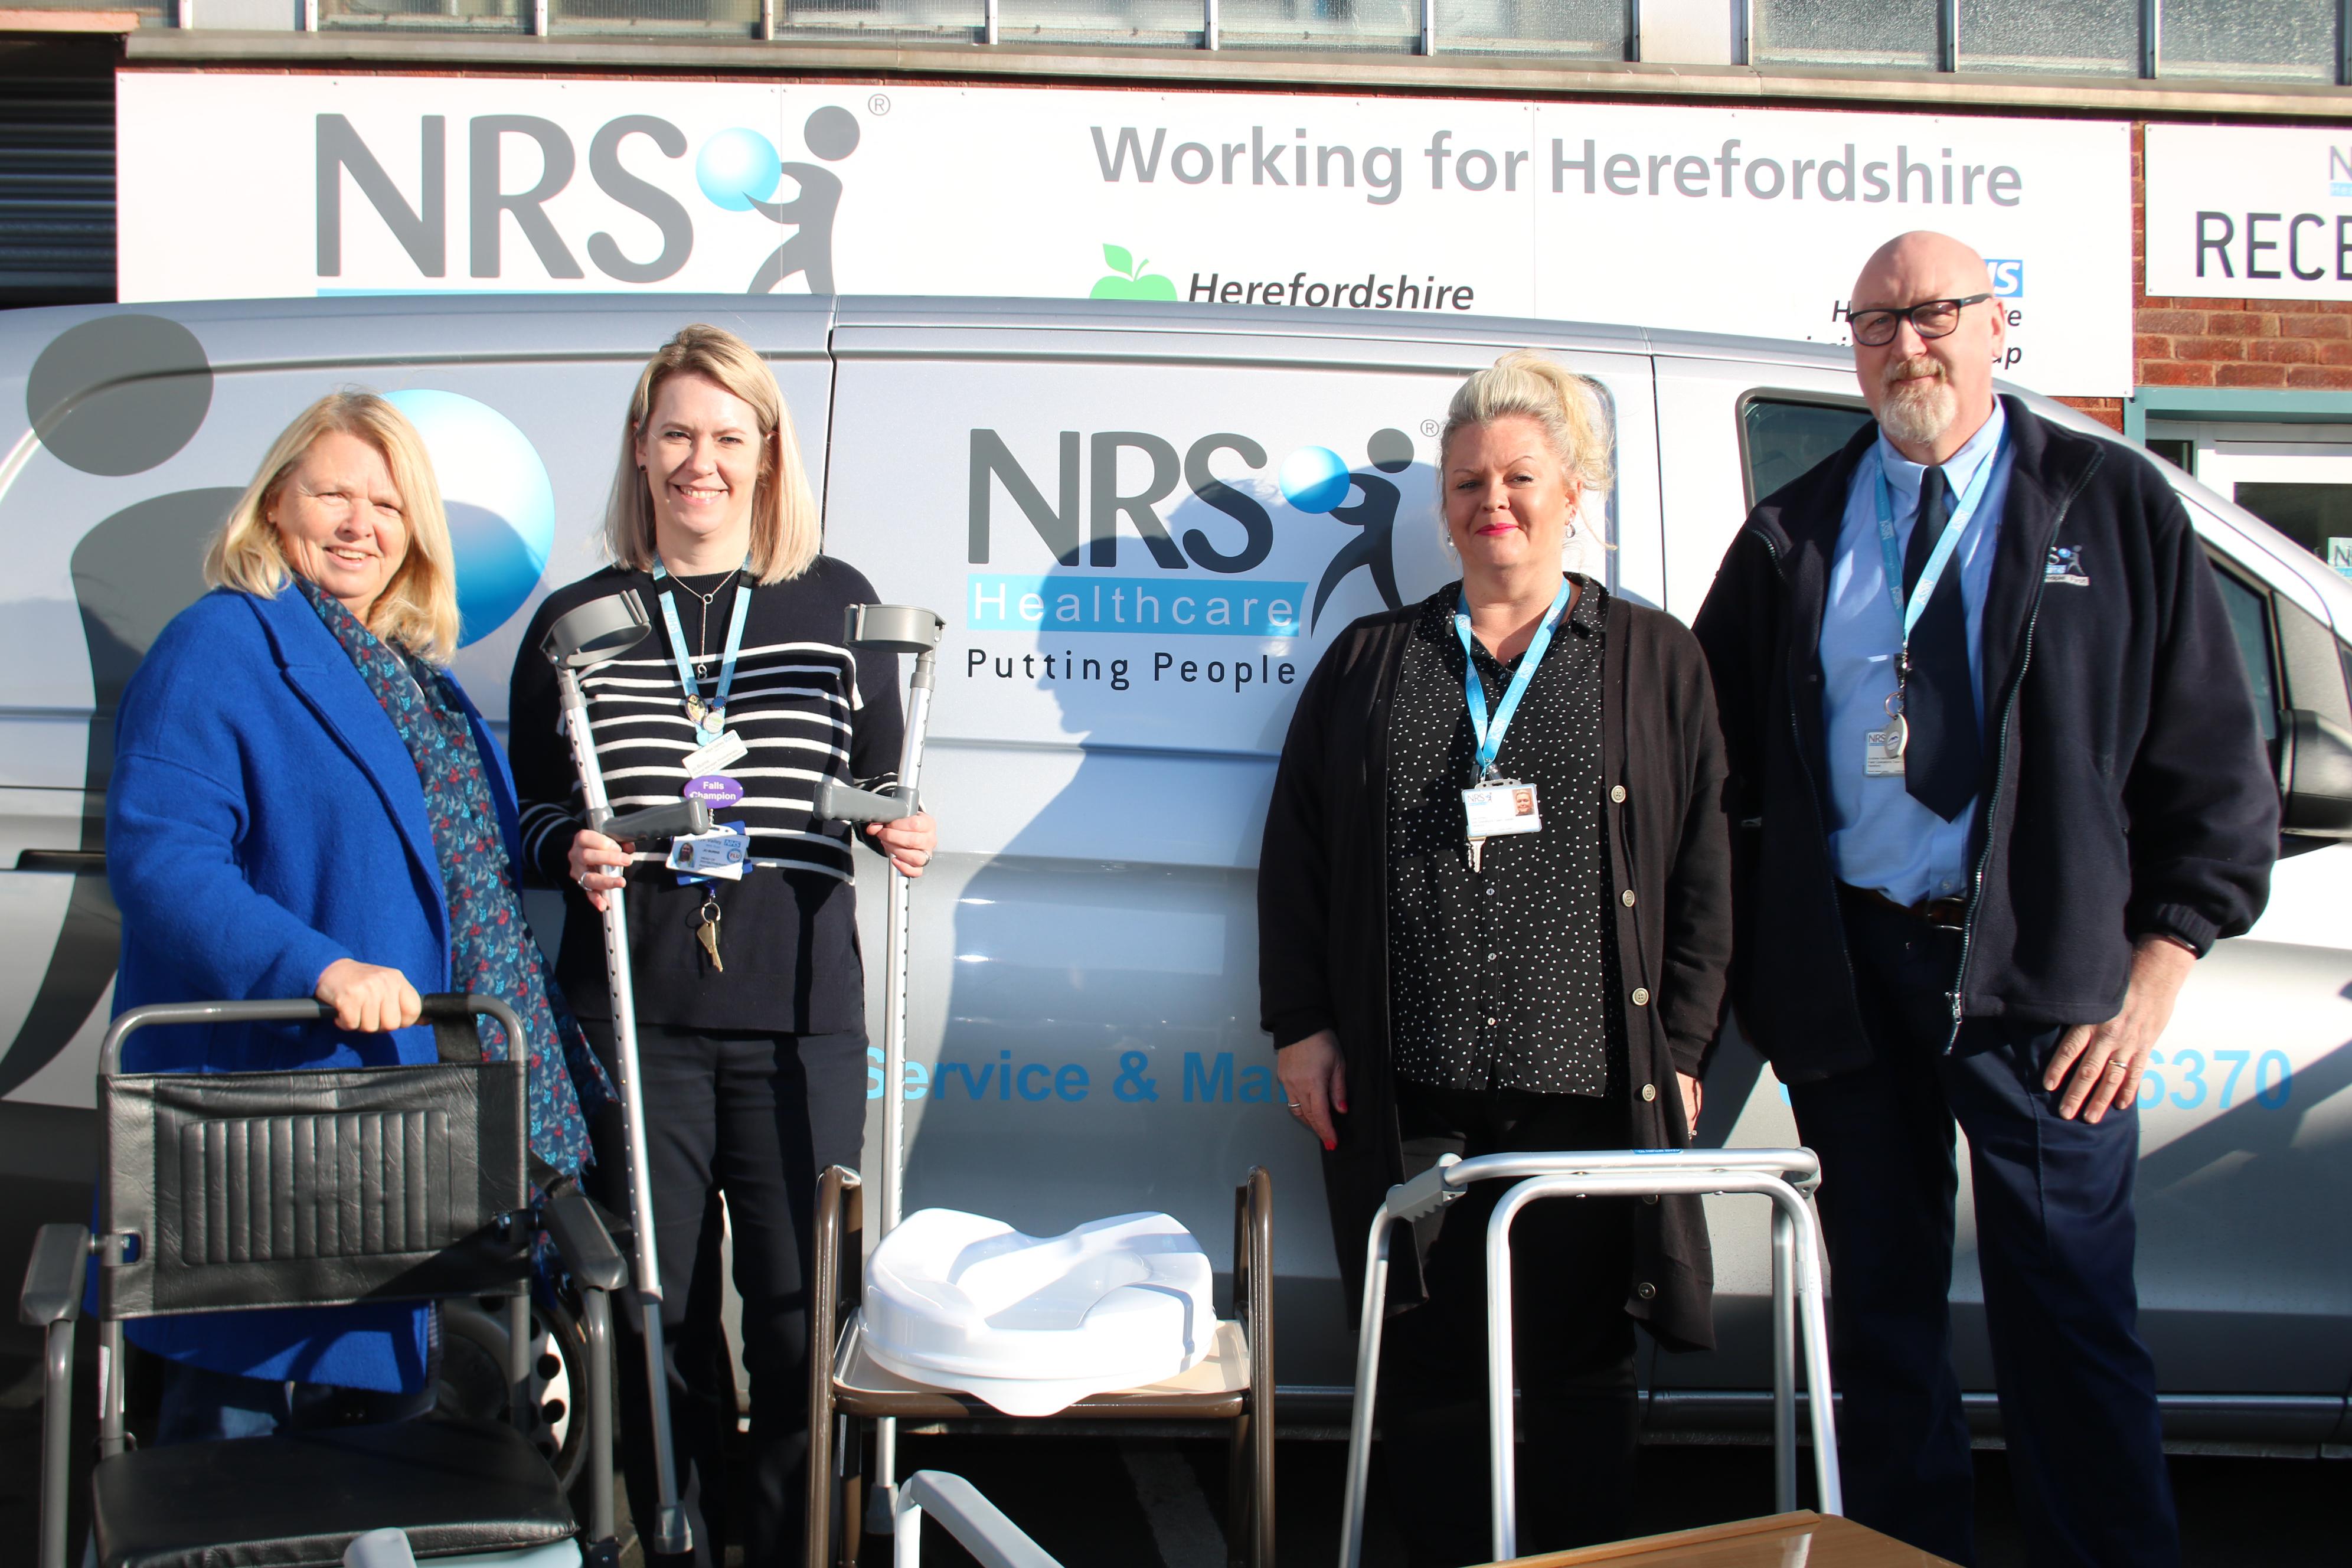 Do you or someone you know have unwanted medical equipment that can now be returned?